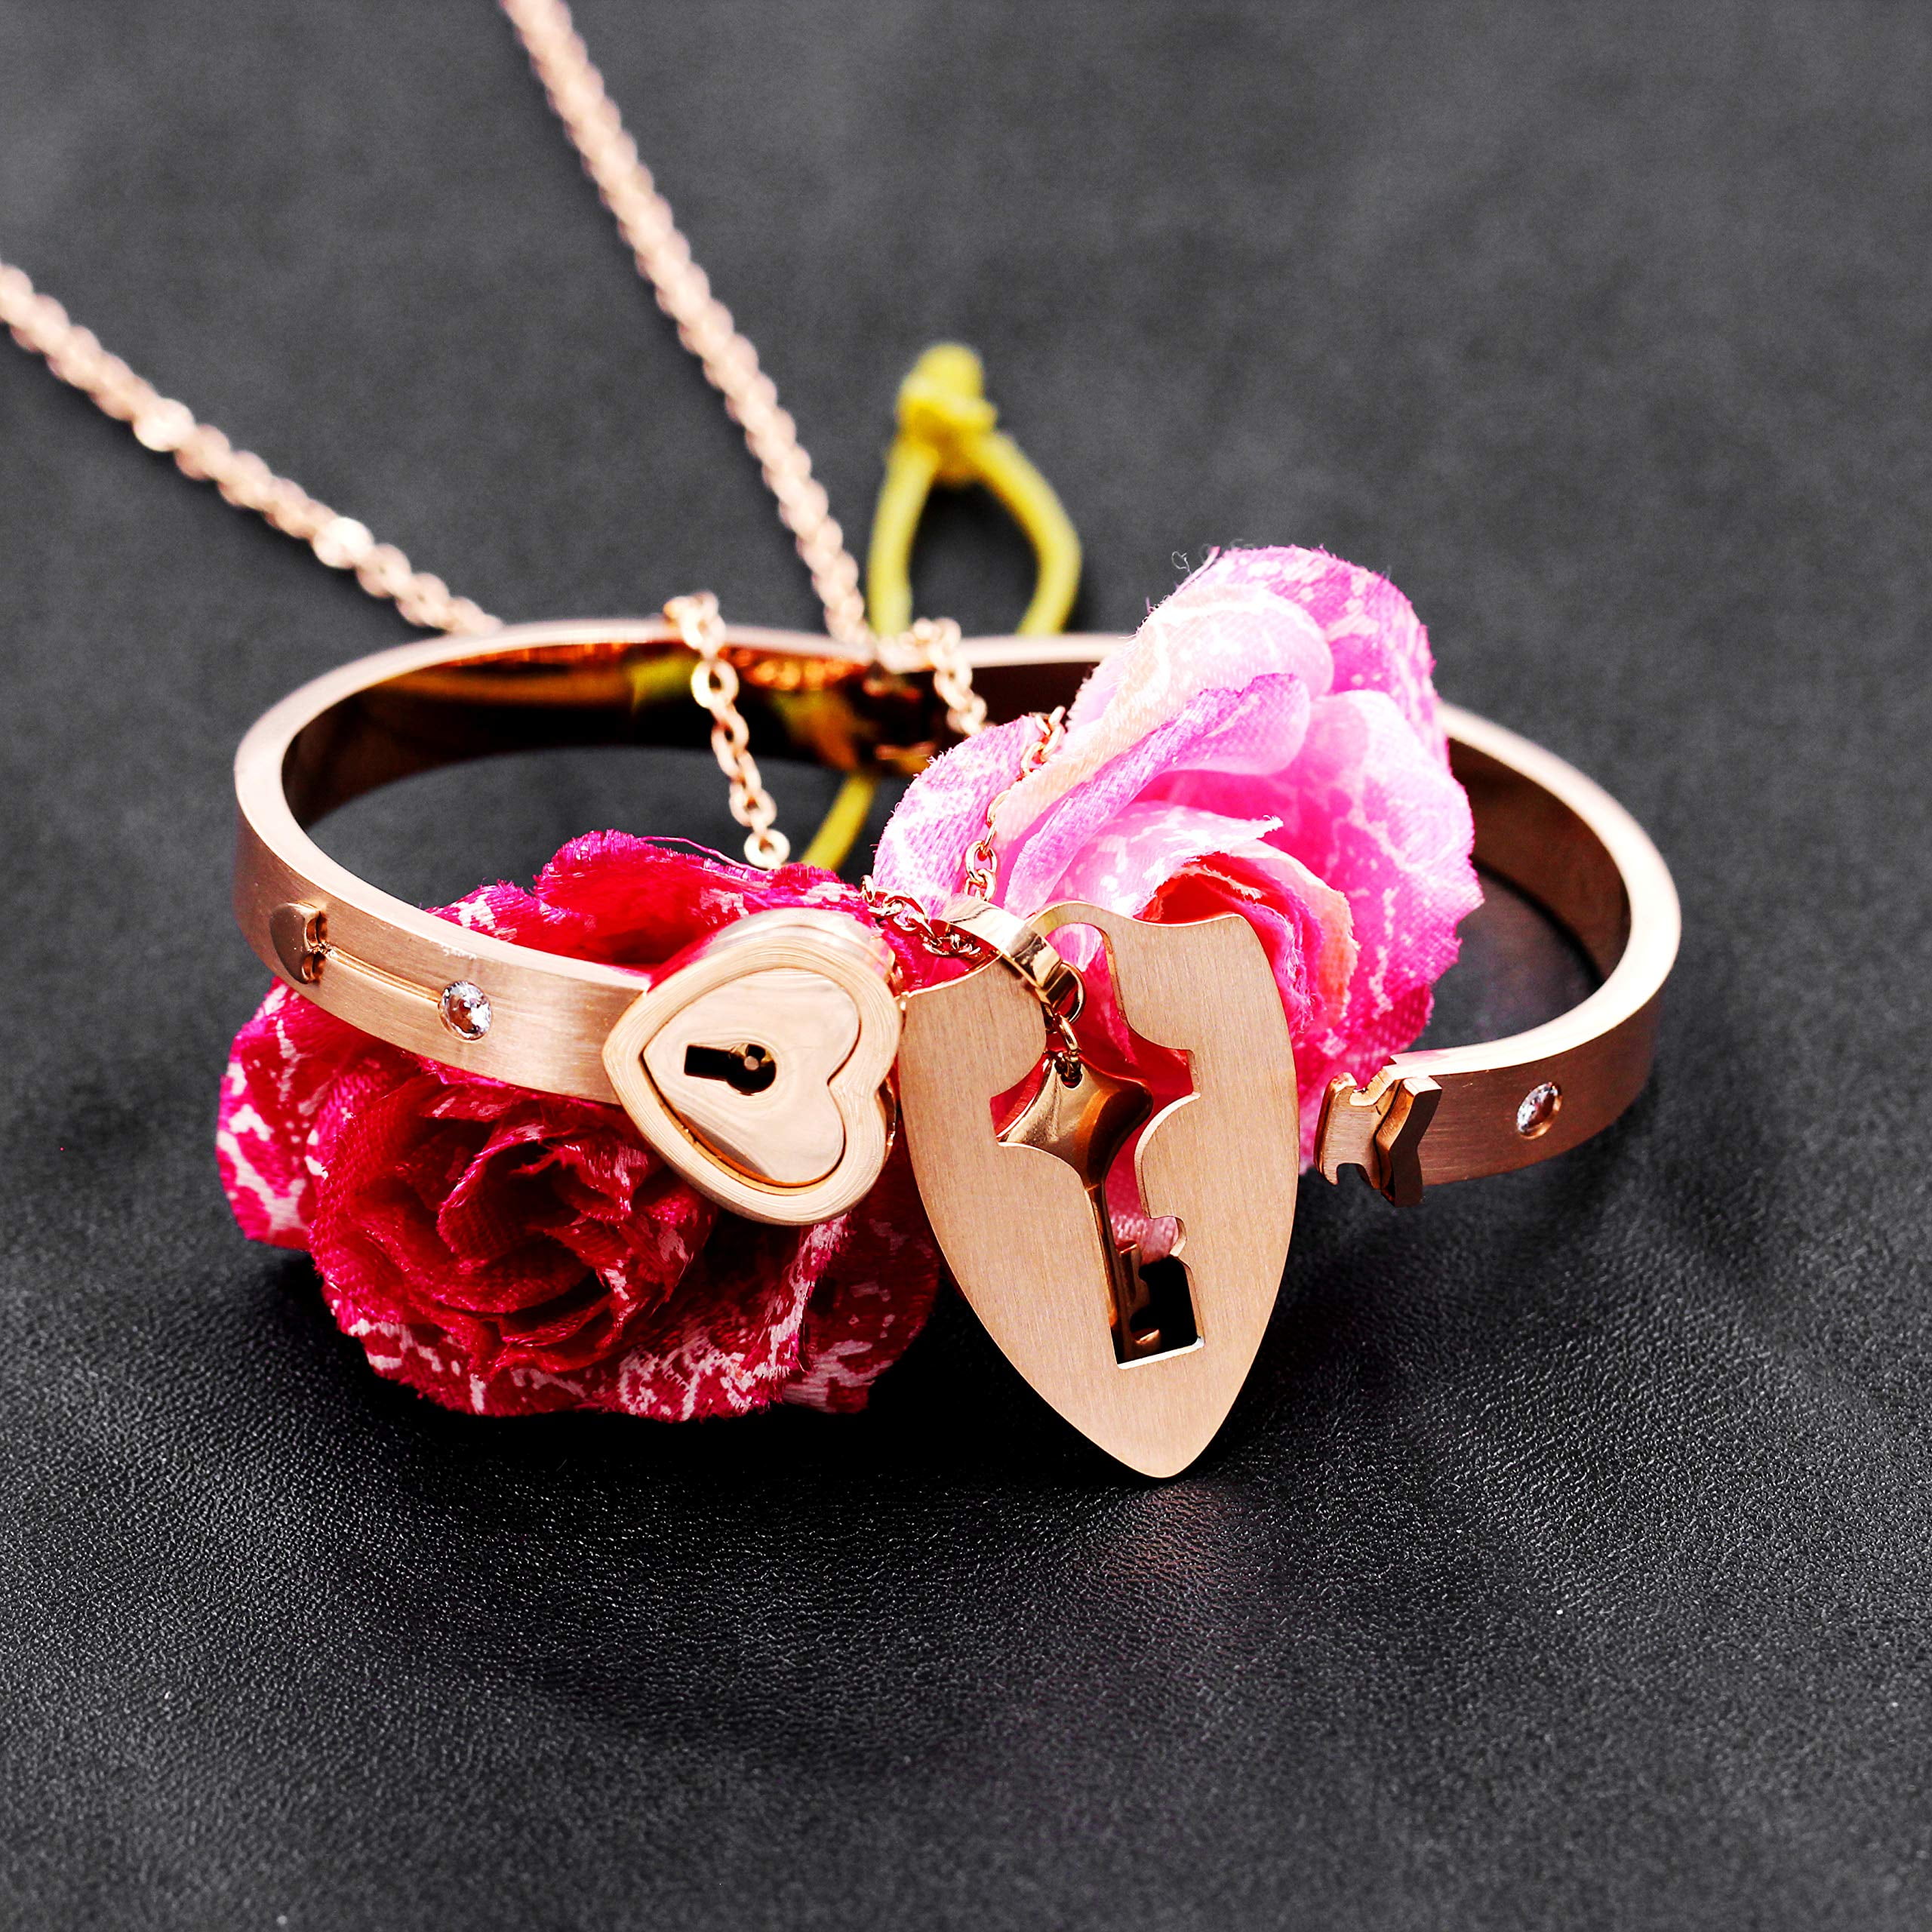 A Couple Lover Jewelry Sets Stainless Steel Love Heart Lock Bracelets  Bangles Key Pendant Necklace Couples - Jewelry Sets - AliExpress